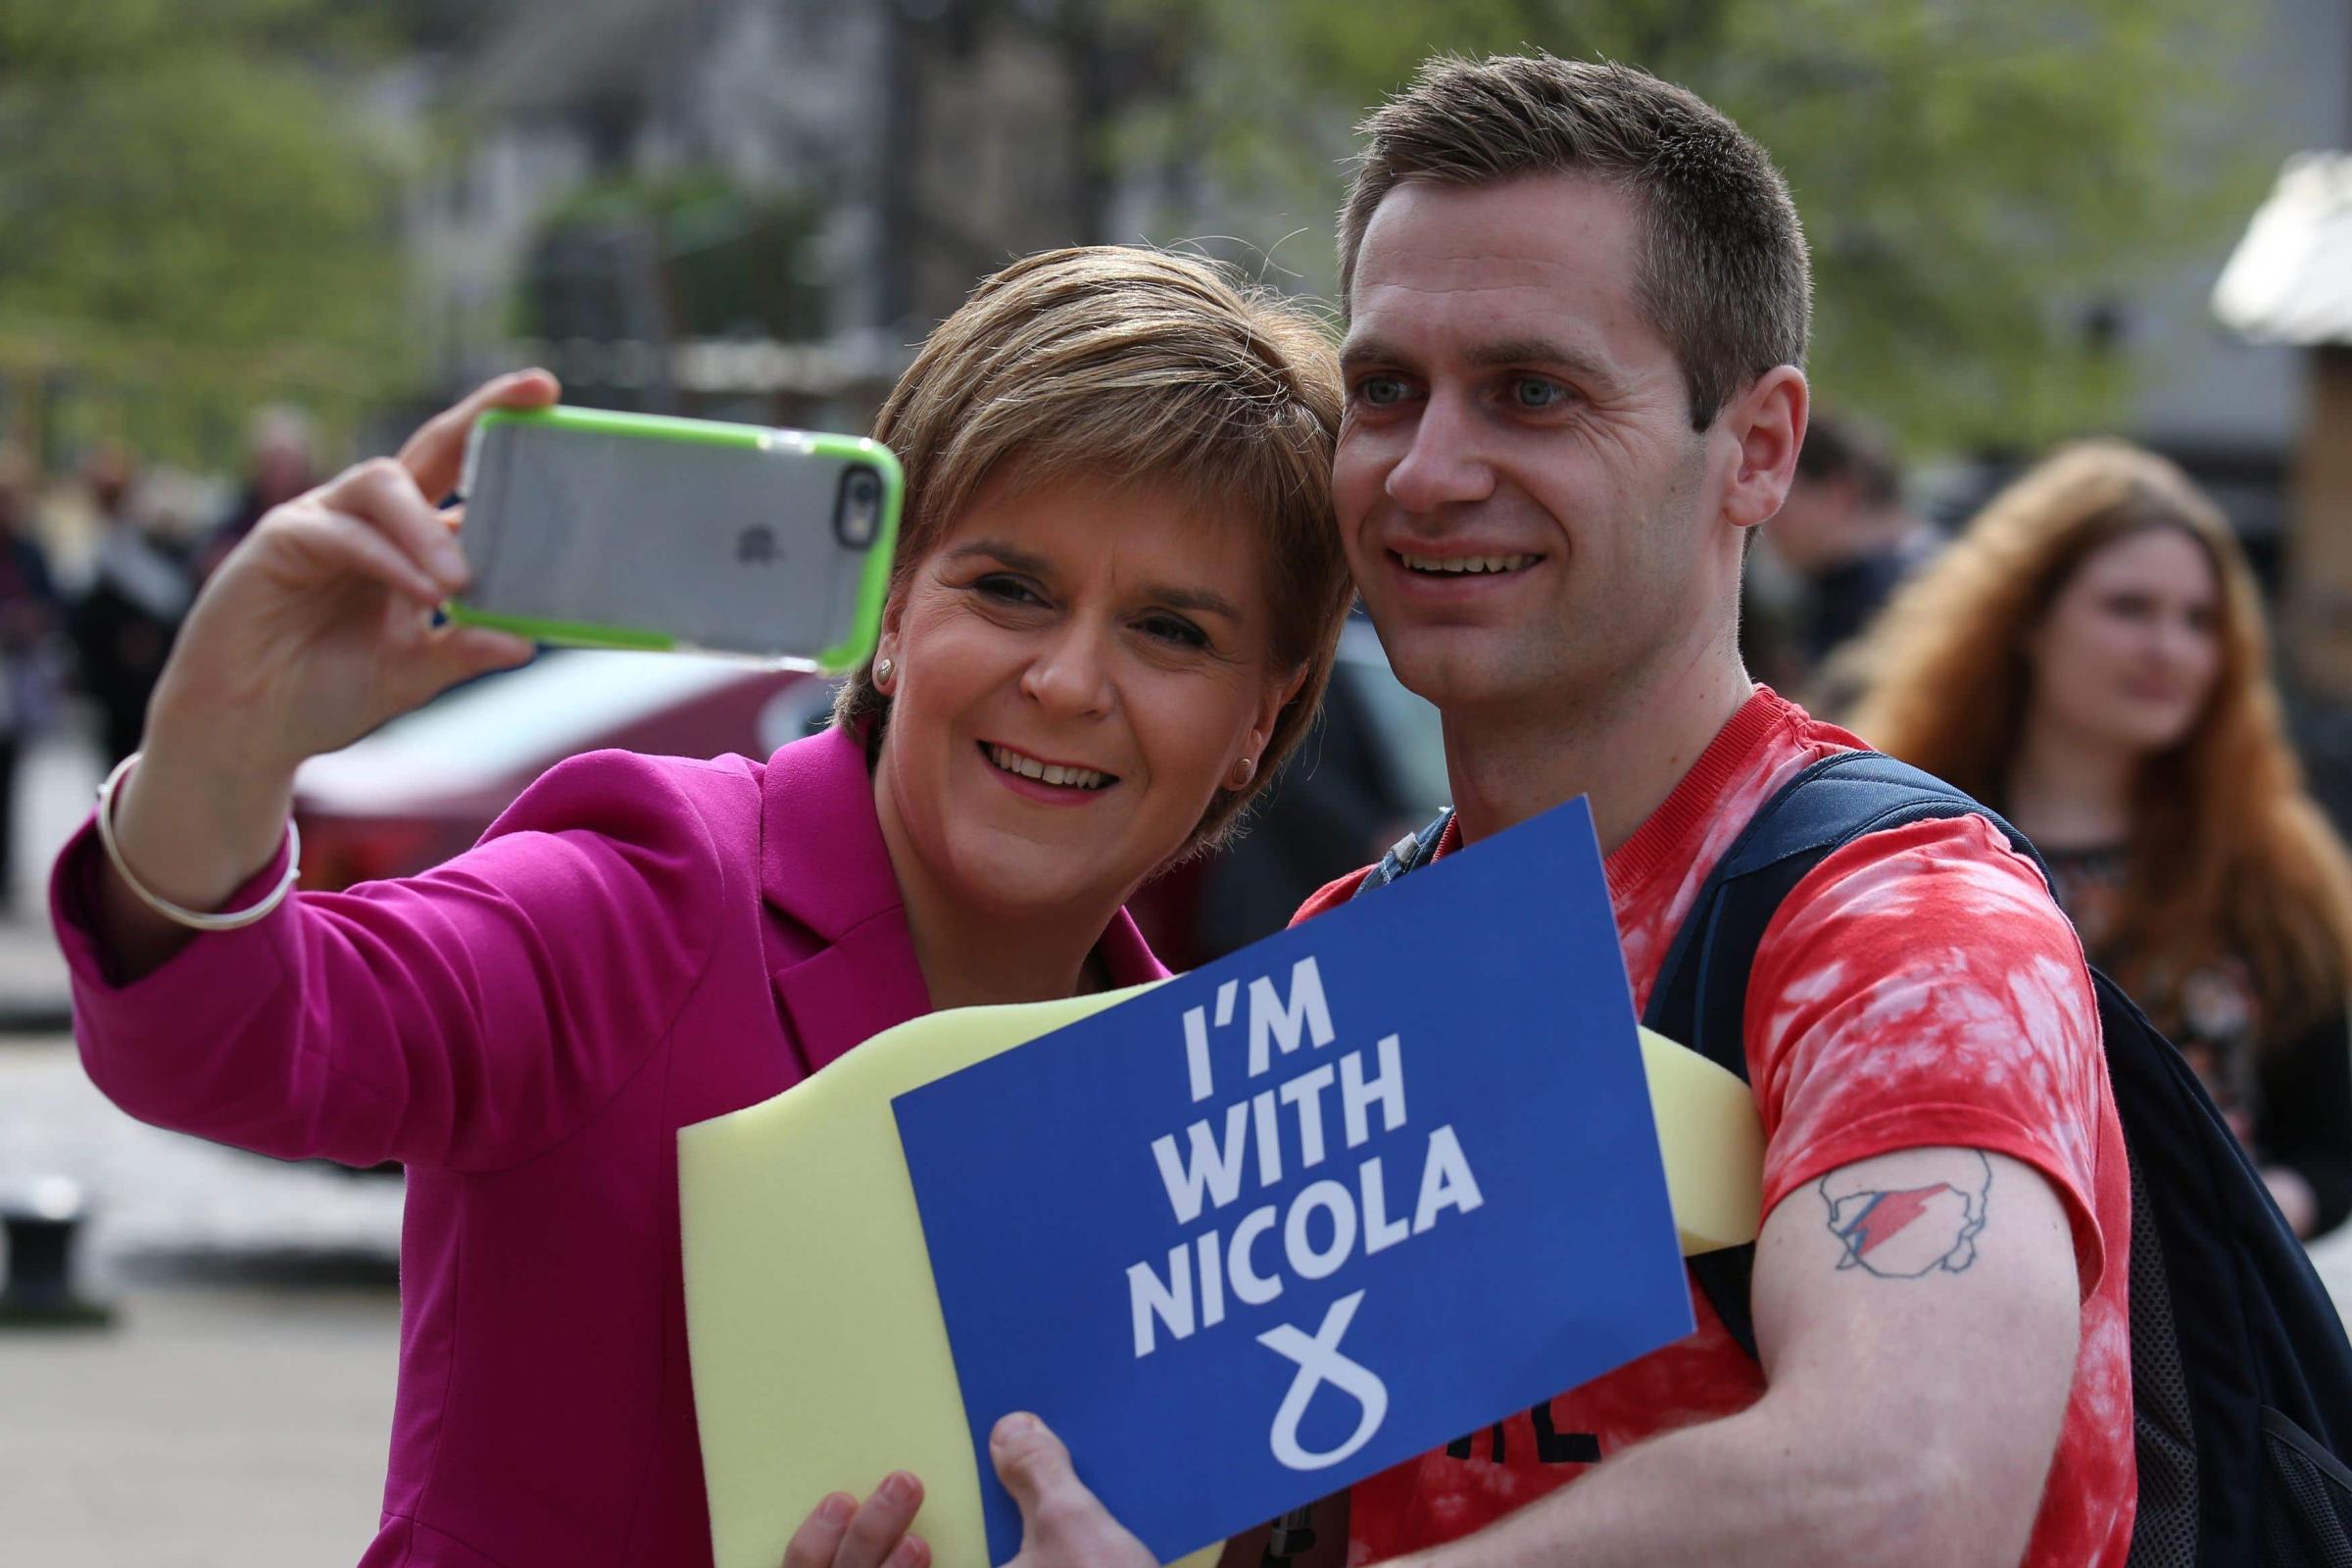 In Pictures Nicola Sturgeon from party youth activist to Scottish leader HeraldScotland picture